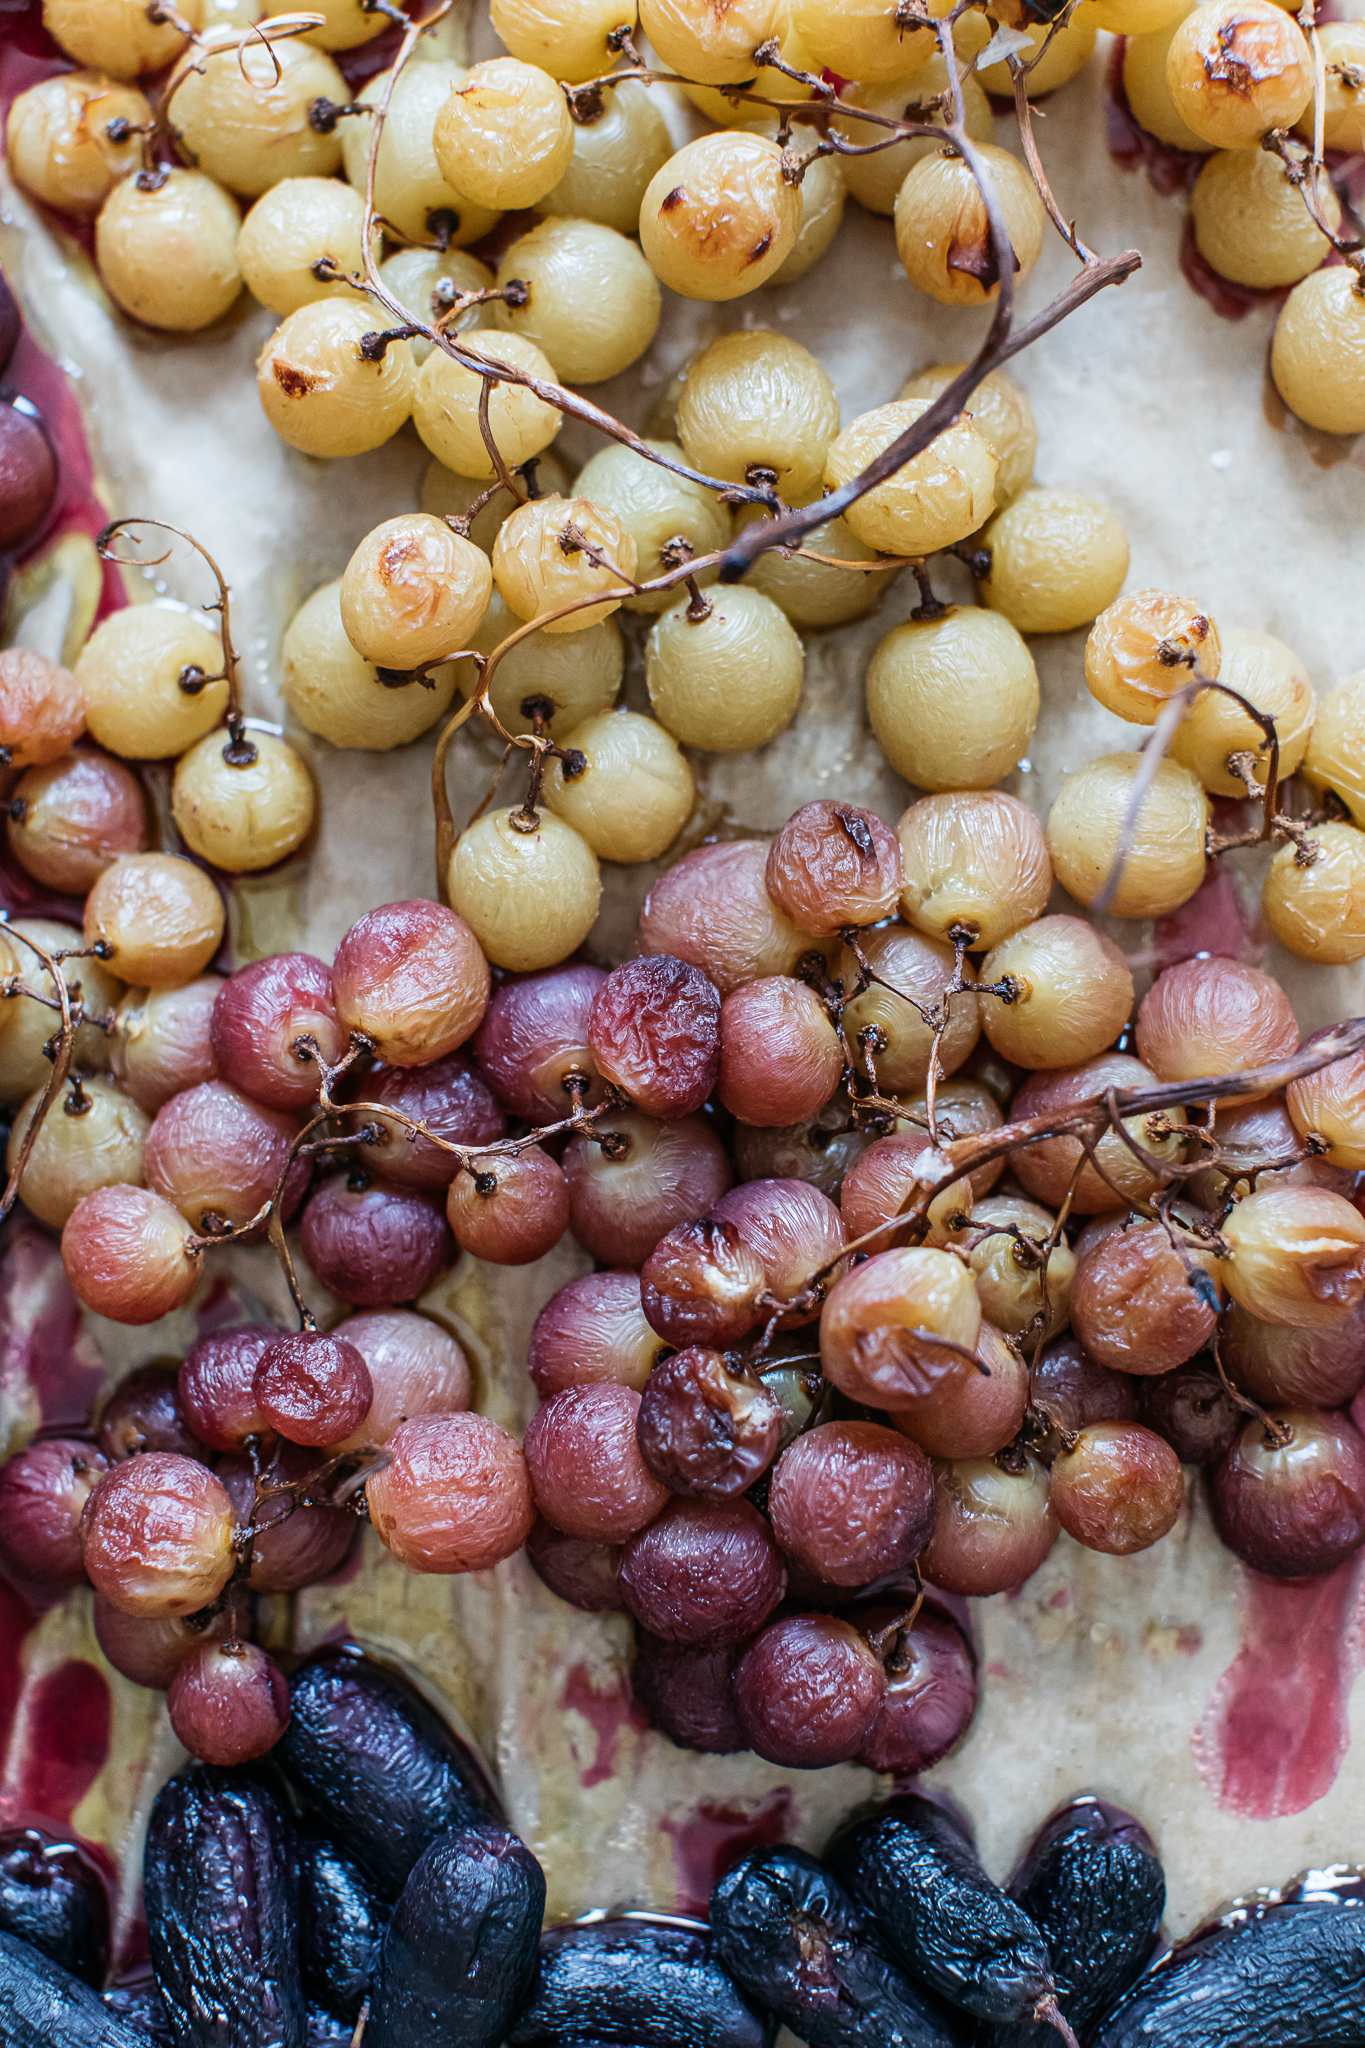 Roasted grapes